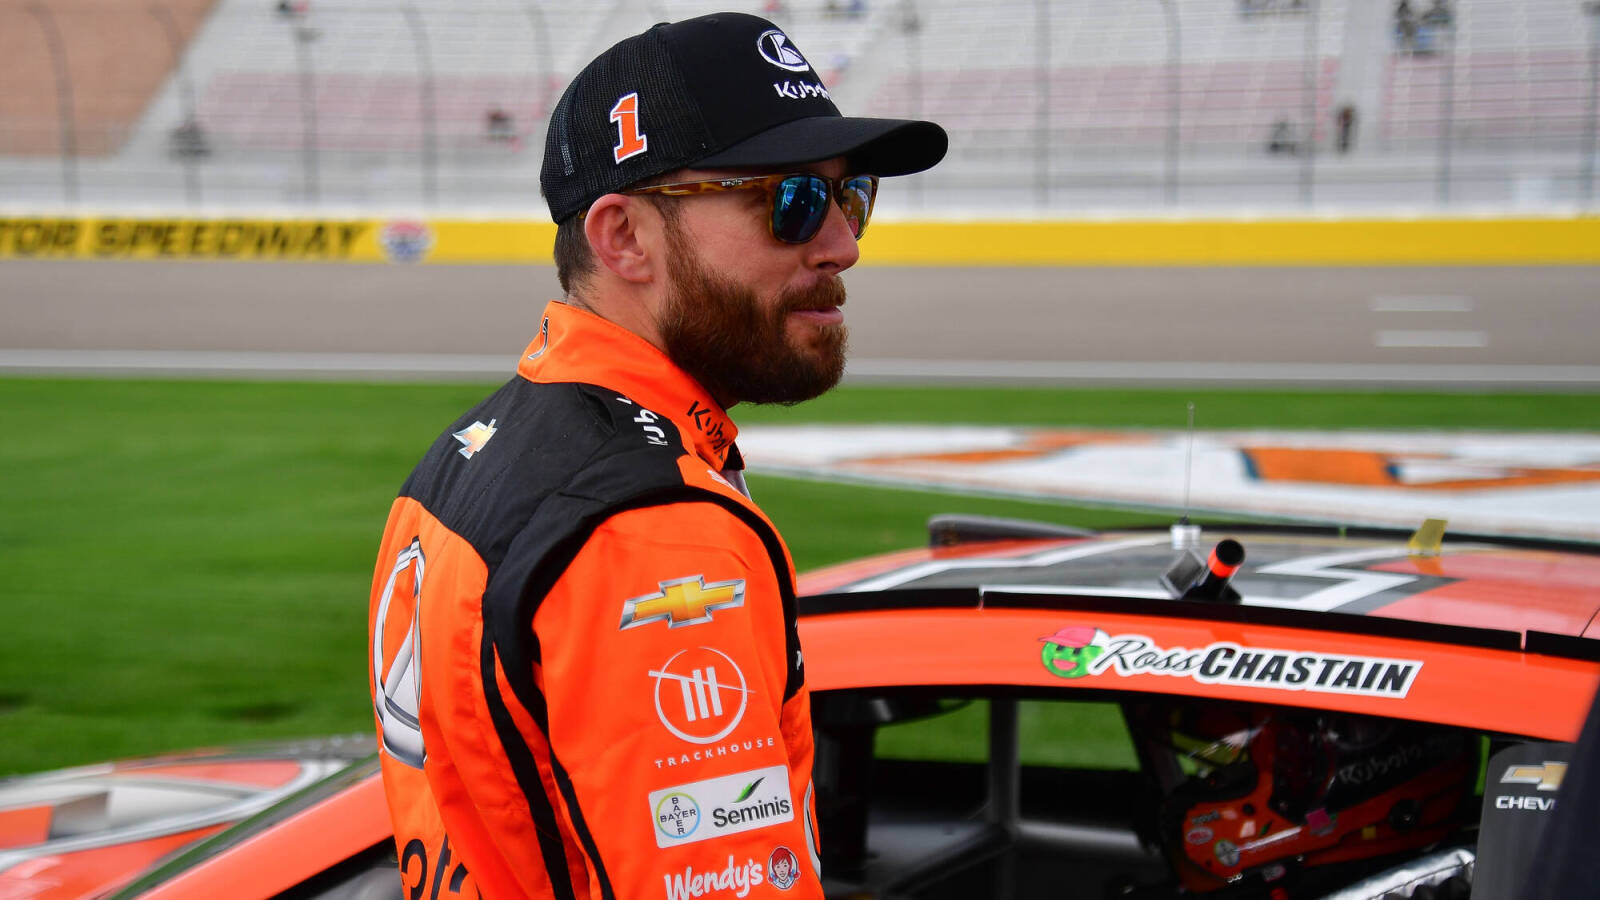 Ross Chastain refused to speak to the media after getting wrecked by Willam Byron on the final lap of the Texas Cup race